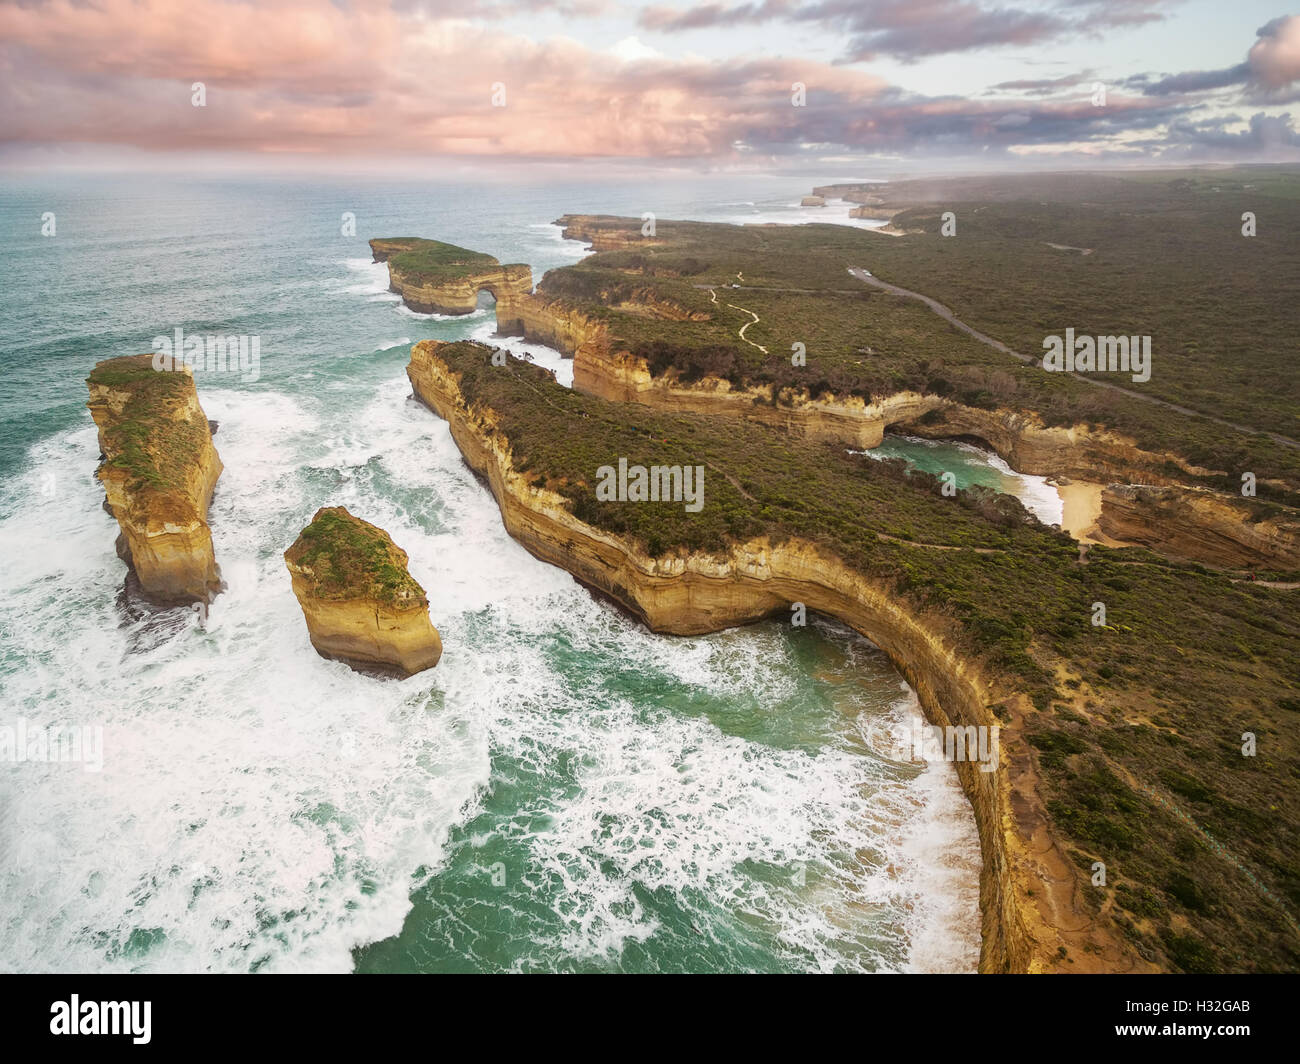 Aerial view of the Island Arch rock formation and Mutton Bird Island on the Great Ocean Road, Victoria, Australia Stock Photo